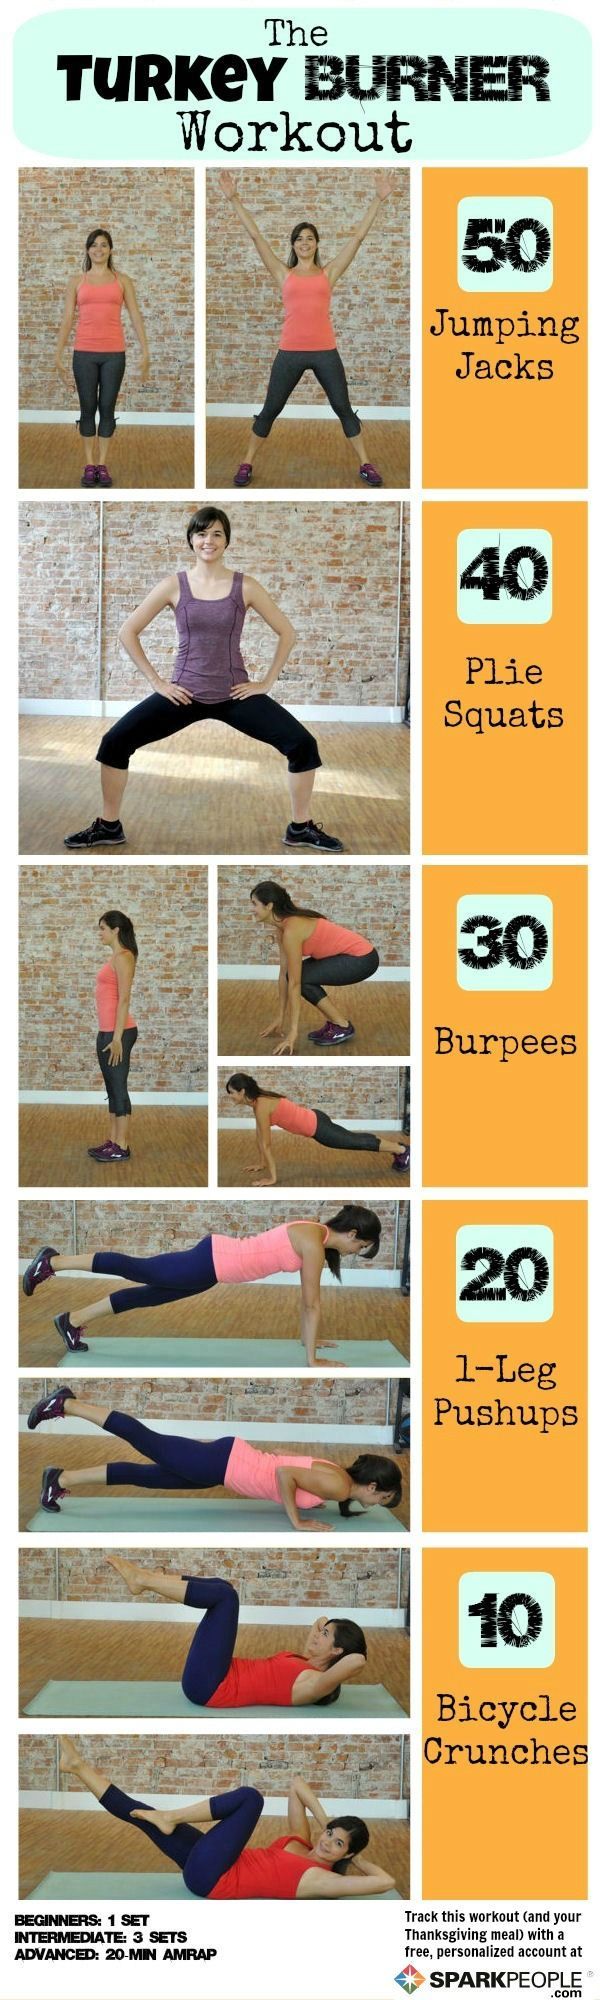 Torch Calories with the Turkey Burner Workout!